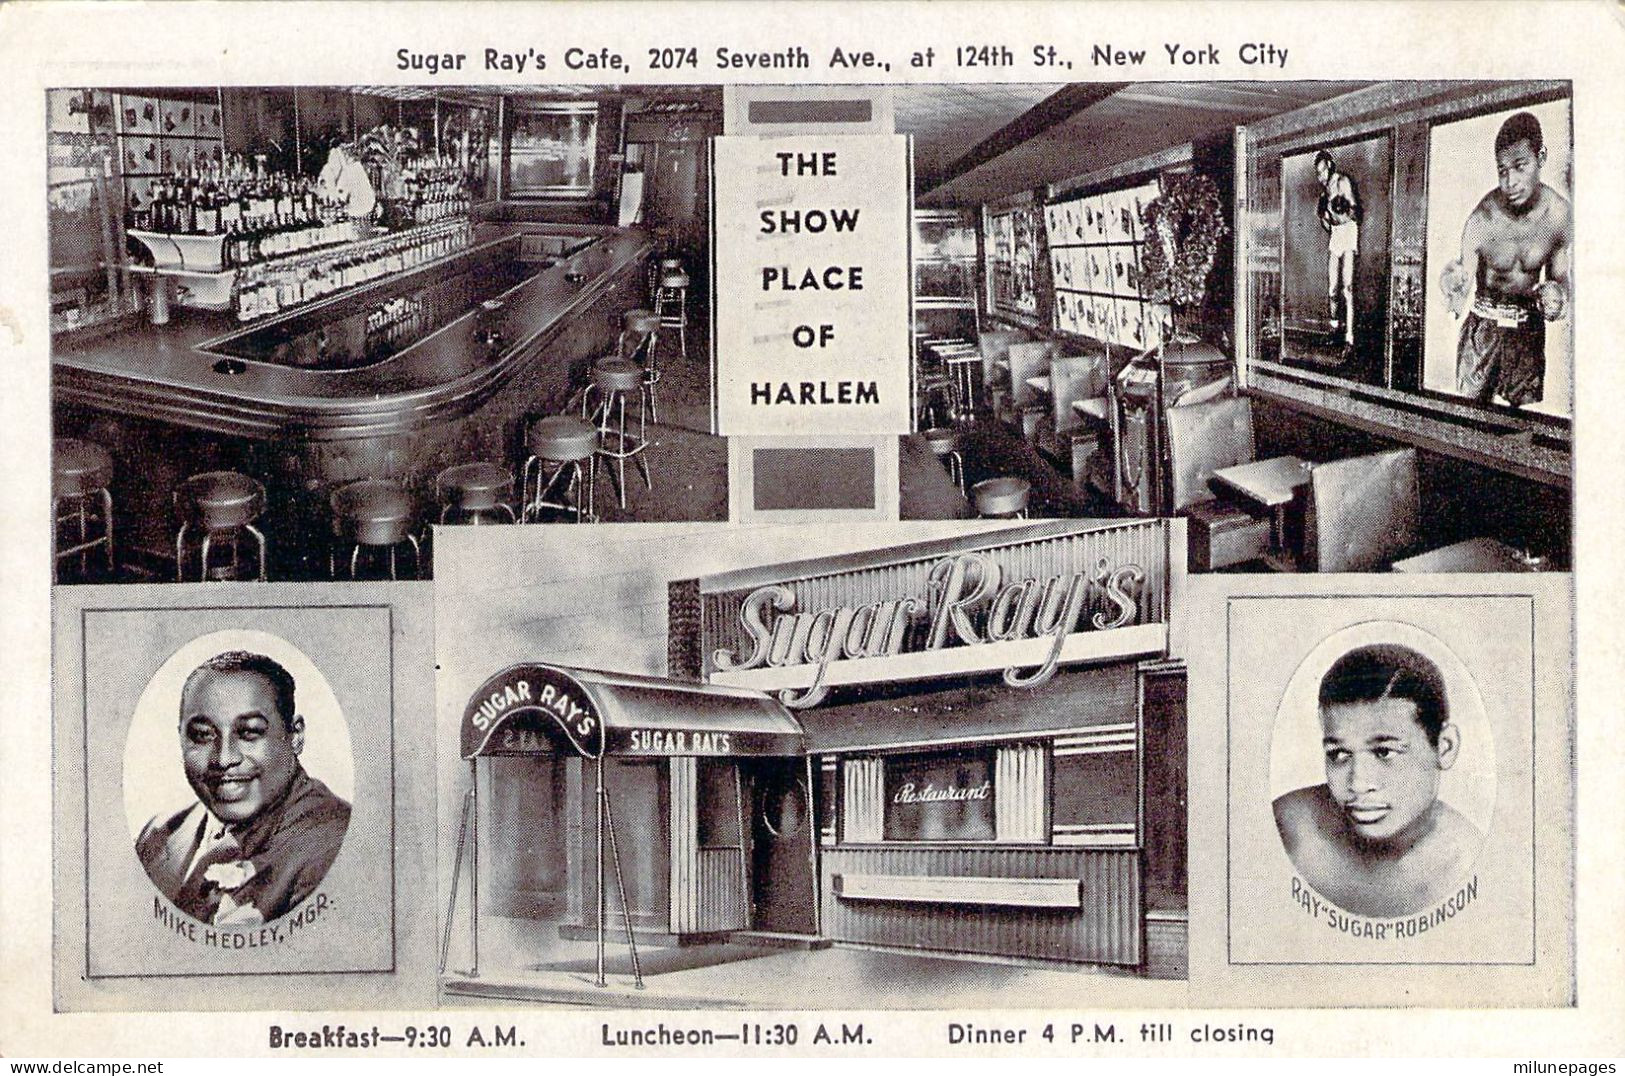 USA NYC Sugar Ray's Café The Show Place Of Harlem Mike Hedley Manager And Ray Sugar Robinson Autograph - Harlem